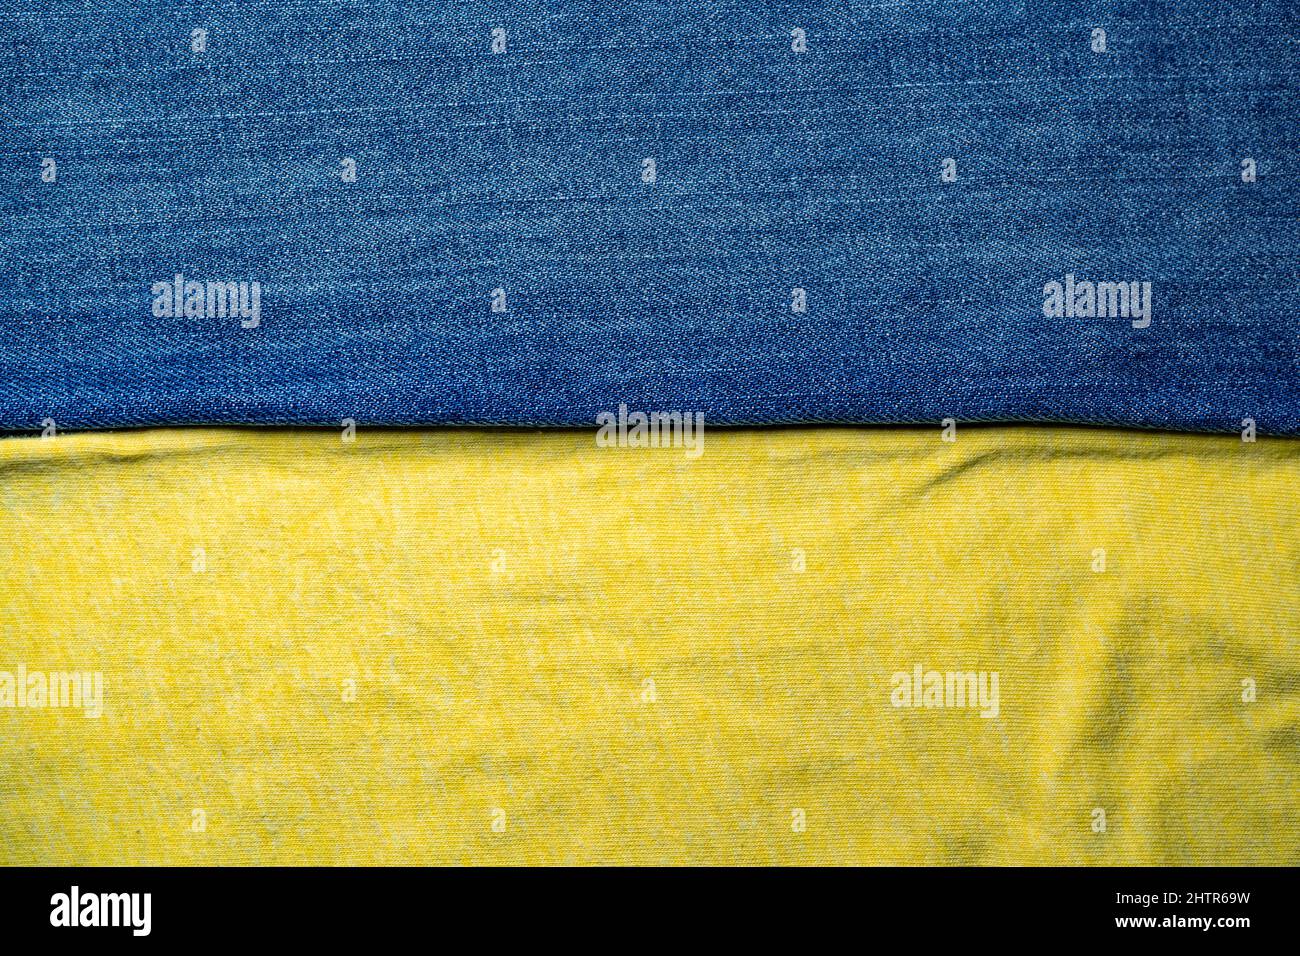 Ukraine flag made from blue Jeans and yellow cotton Stock Photo